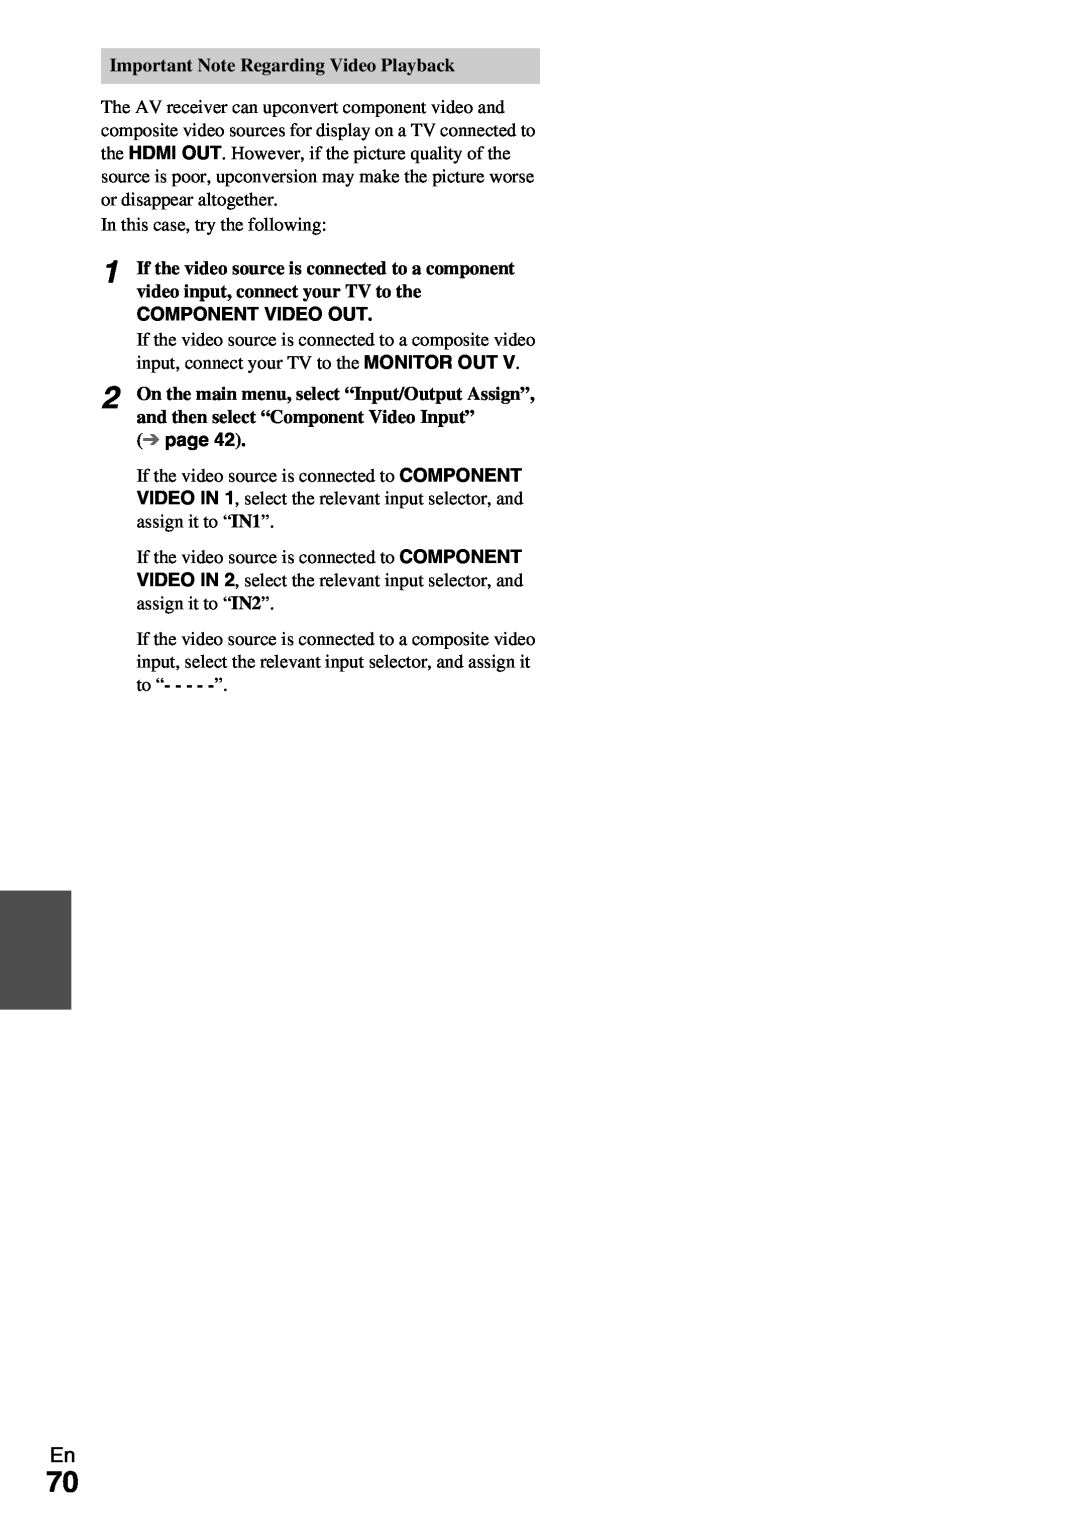 Onkyo TX-NR579 instruction manual Important Note Regarding Video Playback, Component Video Out, page 